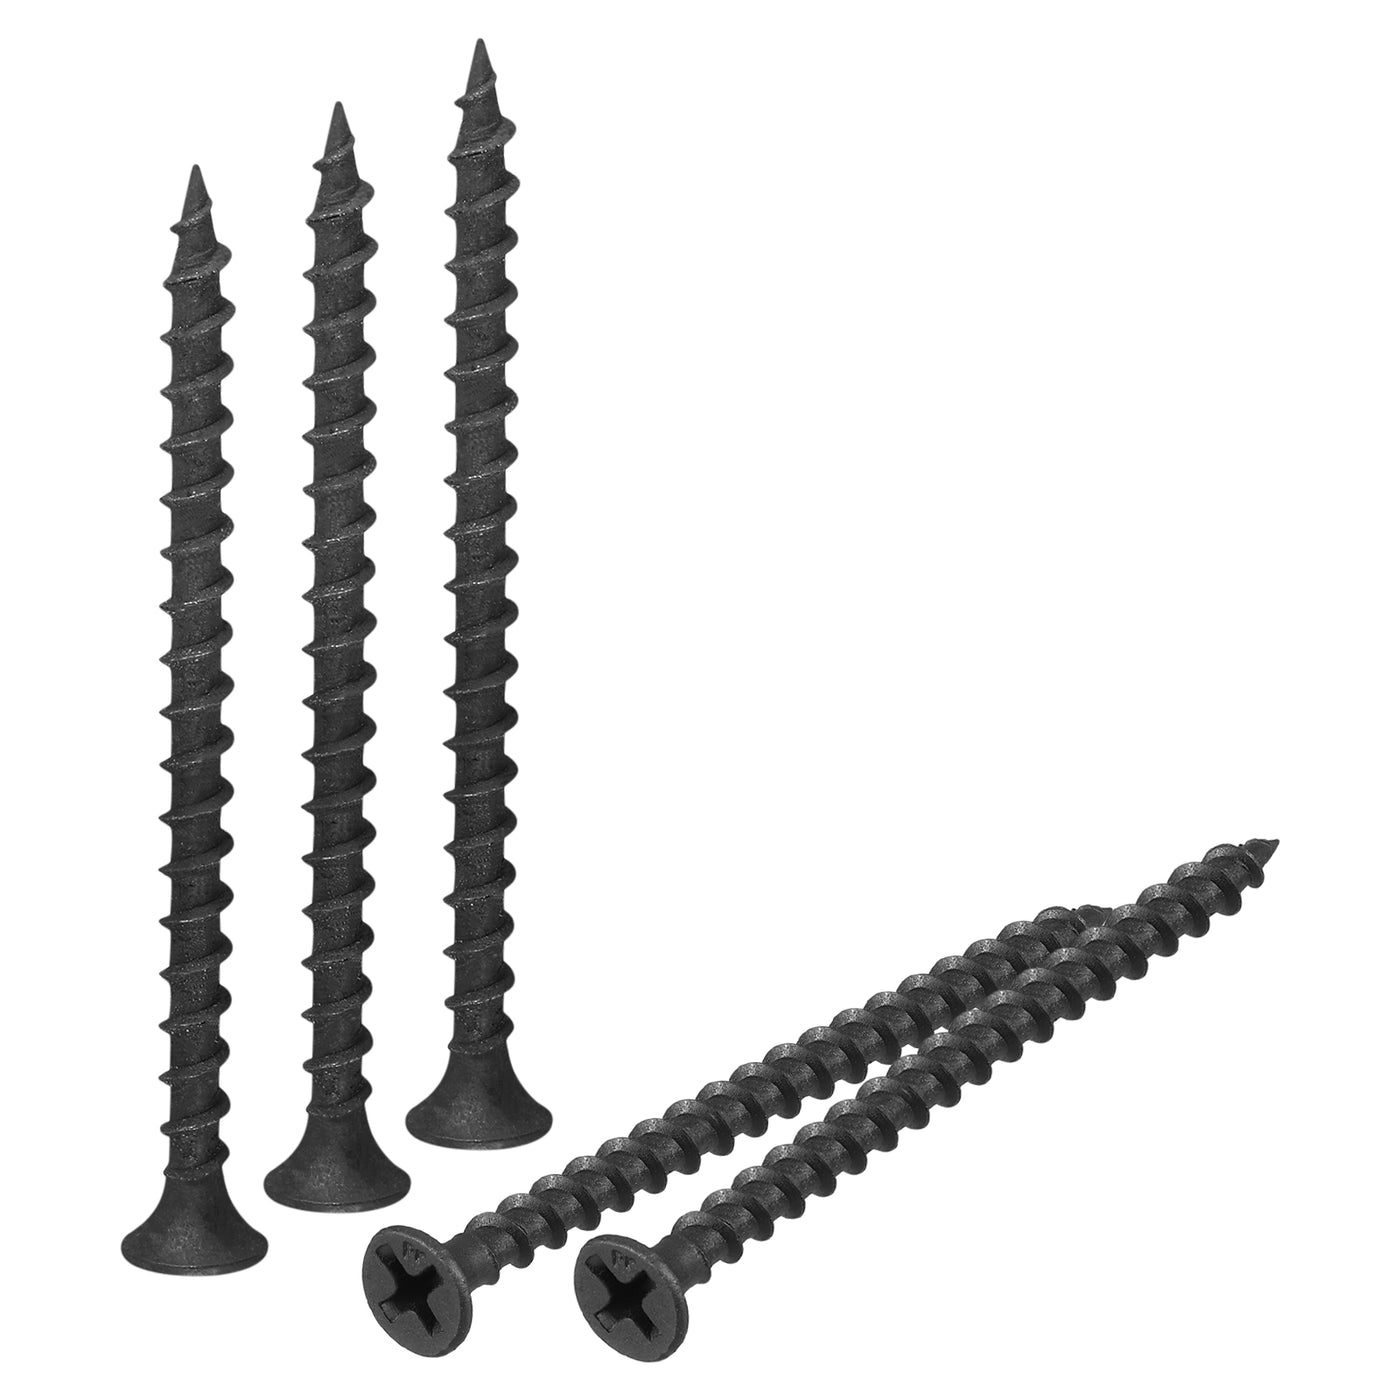 uxcell Uxcell M3.8x60mm 100pcs Phillips Drive Wood Screws, Carbon Steel Self Tapping Screws